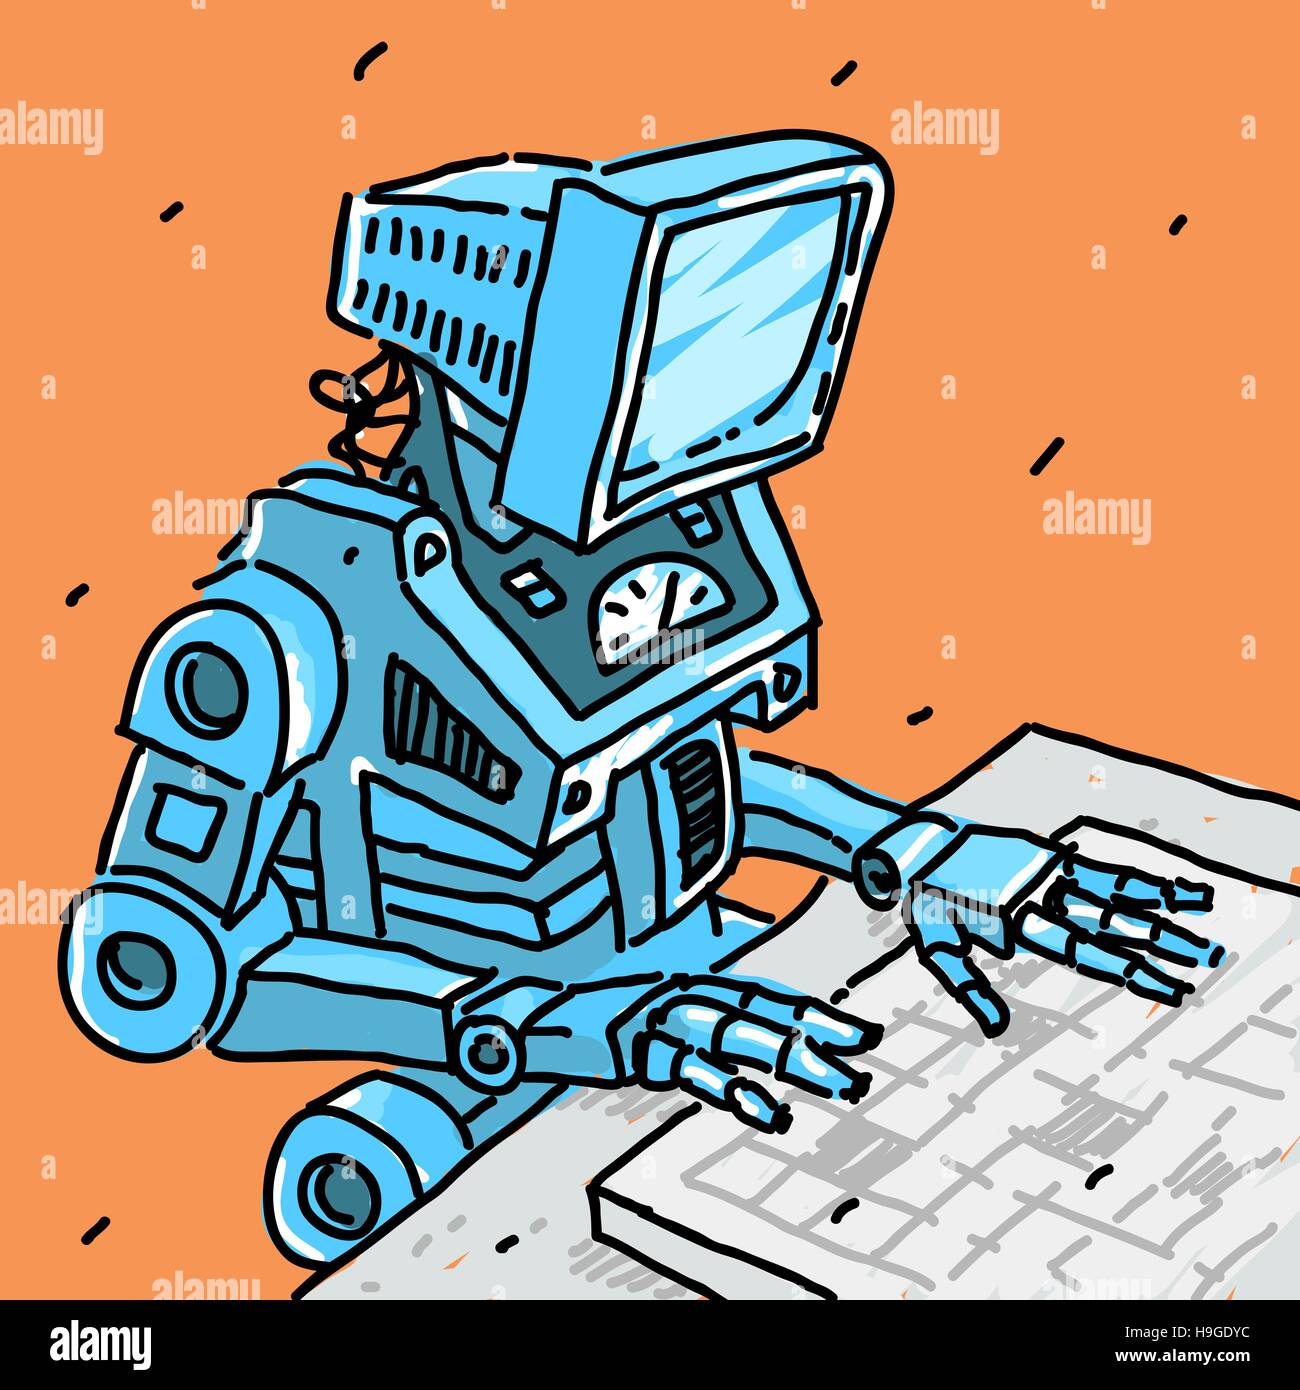 Robot and computer Stock Vector